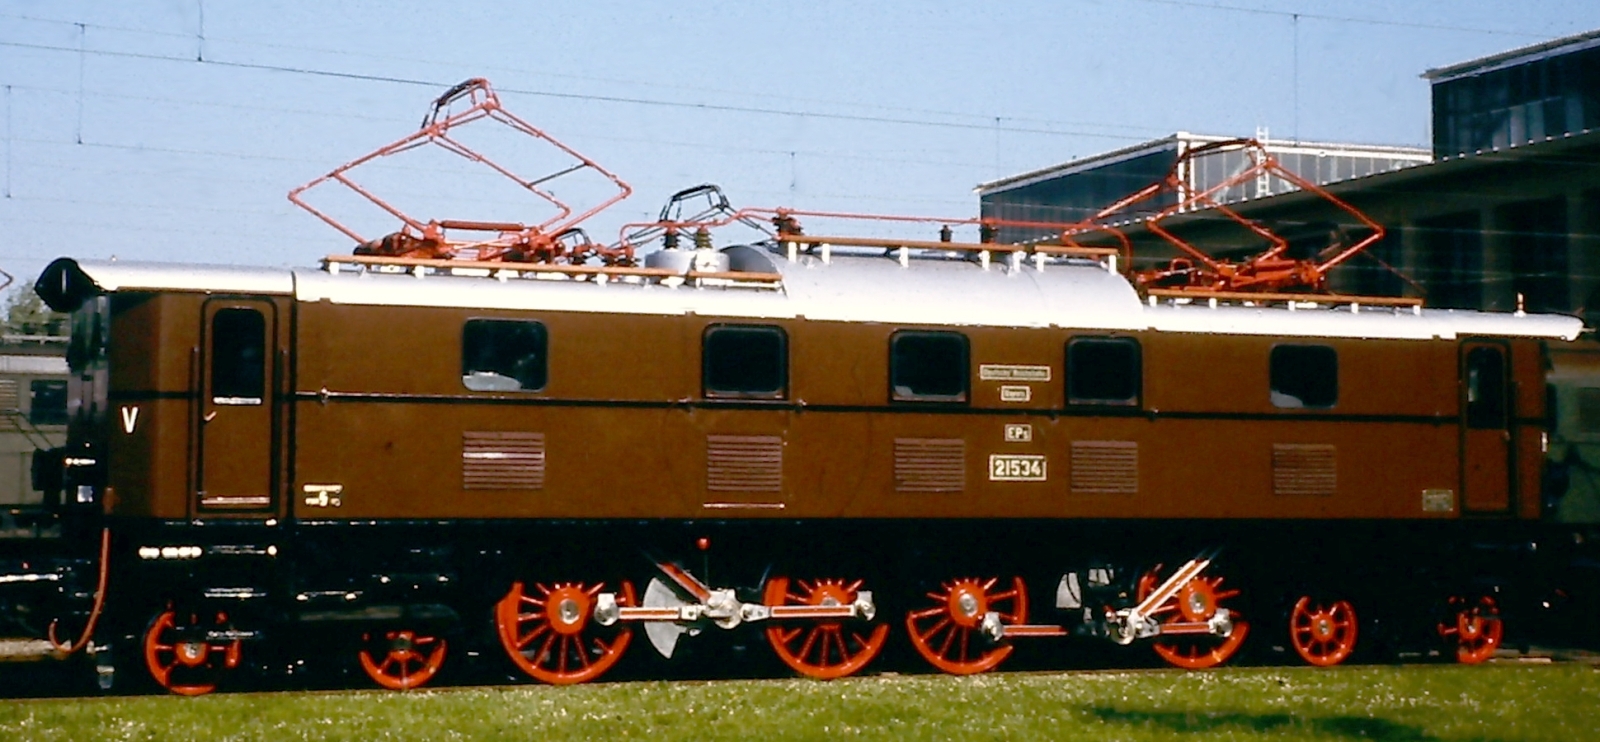 E 52 34 exhibited in the vehicle show “100 years of electric railways” in the AW Munich-Freimann